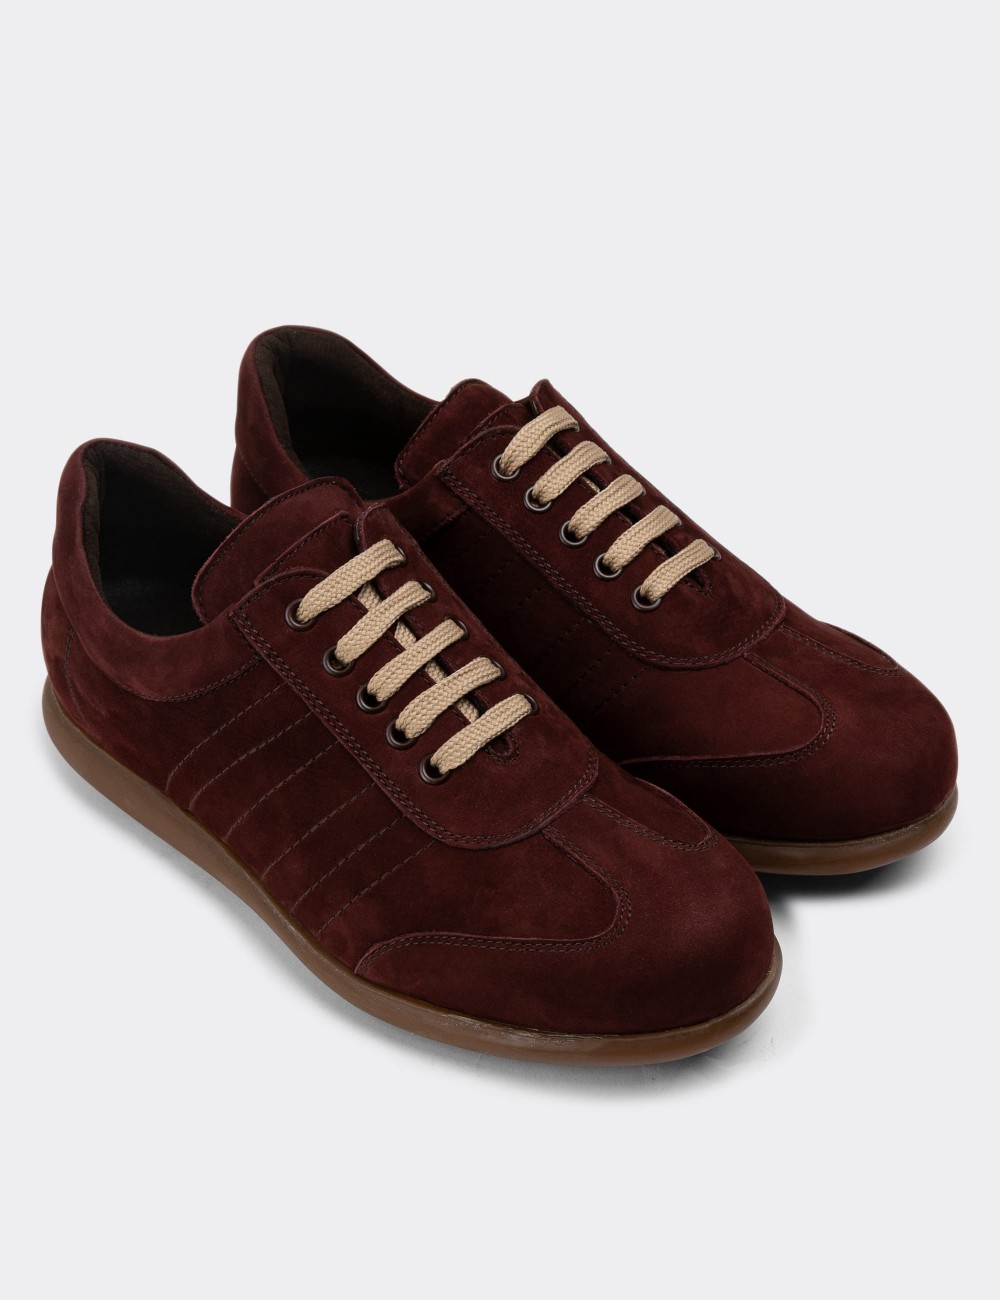 Burgundy Suede Leather Lace-up Shoes - 01826MBRDC05